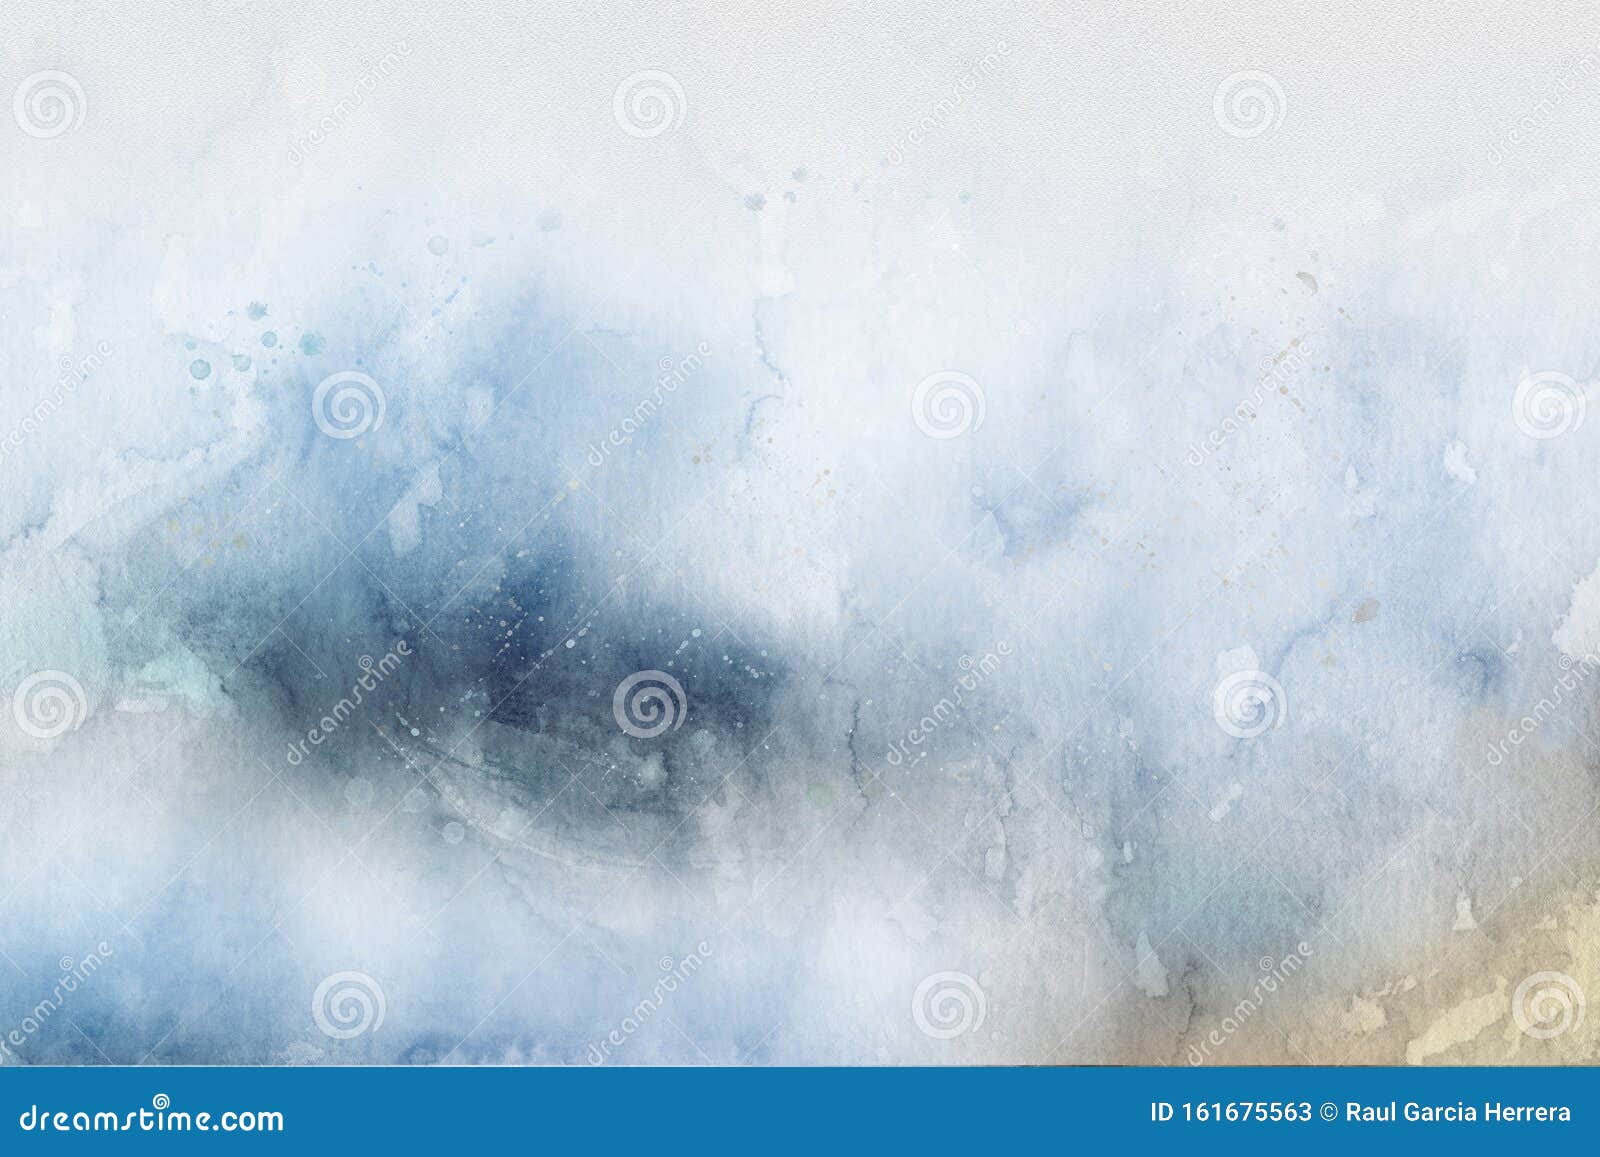 abstract ocean beach watercolor background for textures and backgrounds